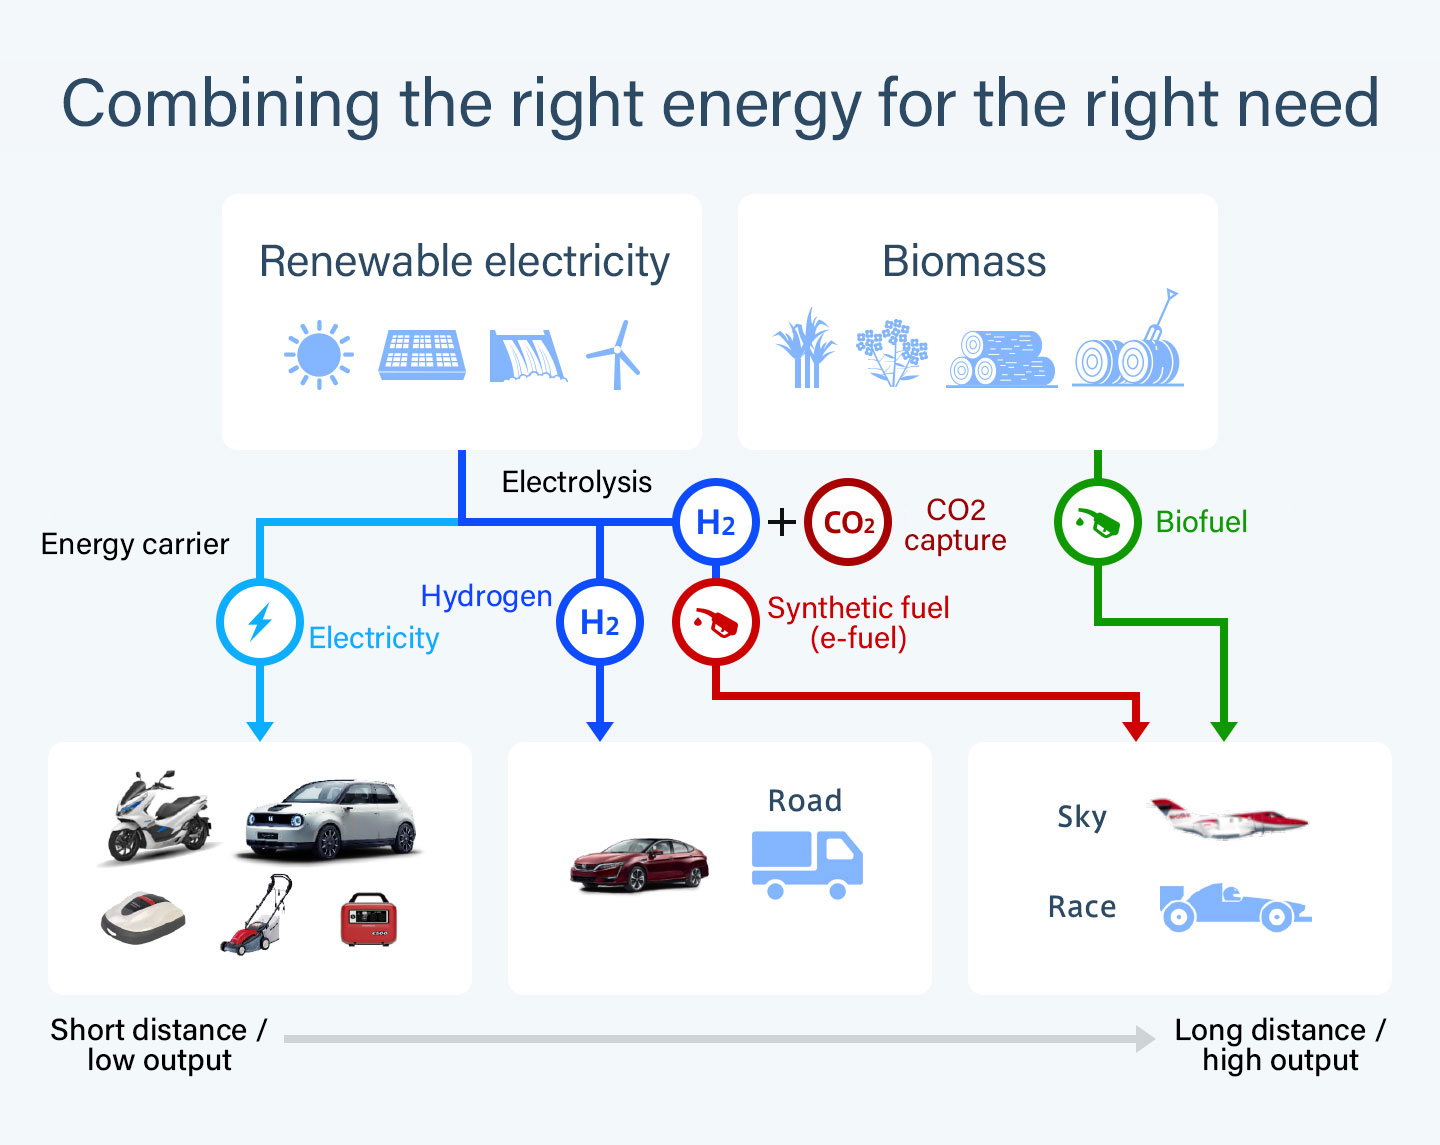 Combining the right energy for the right need